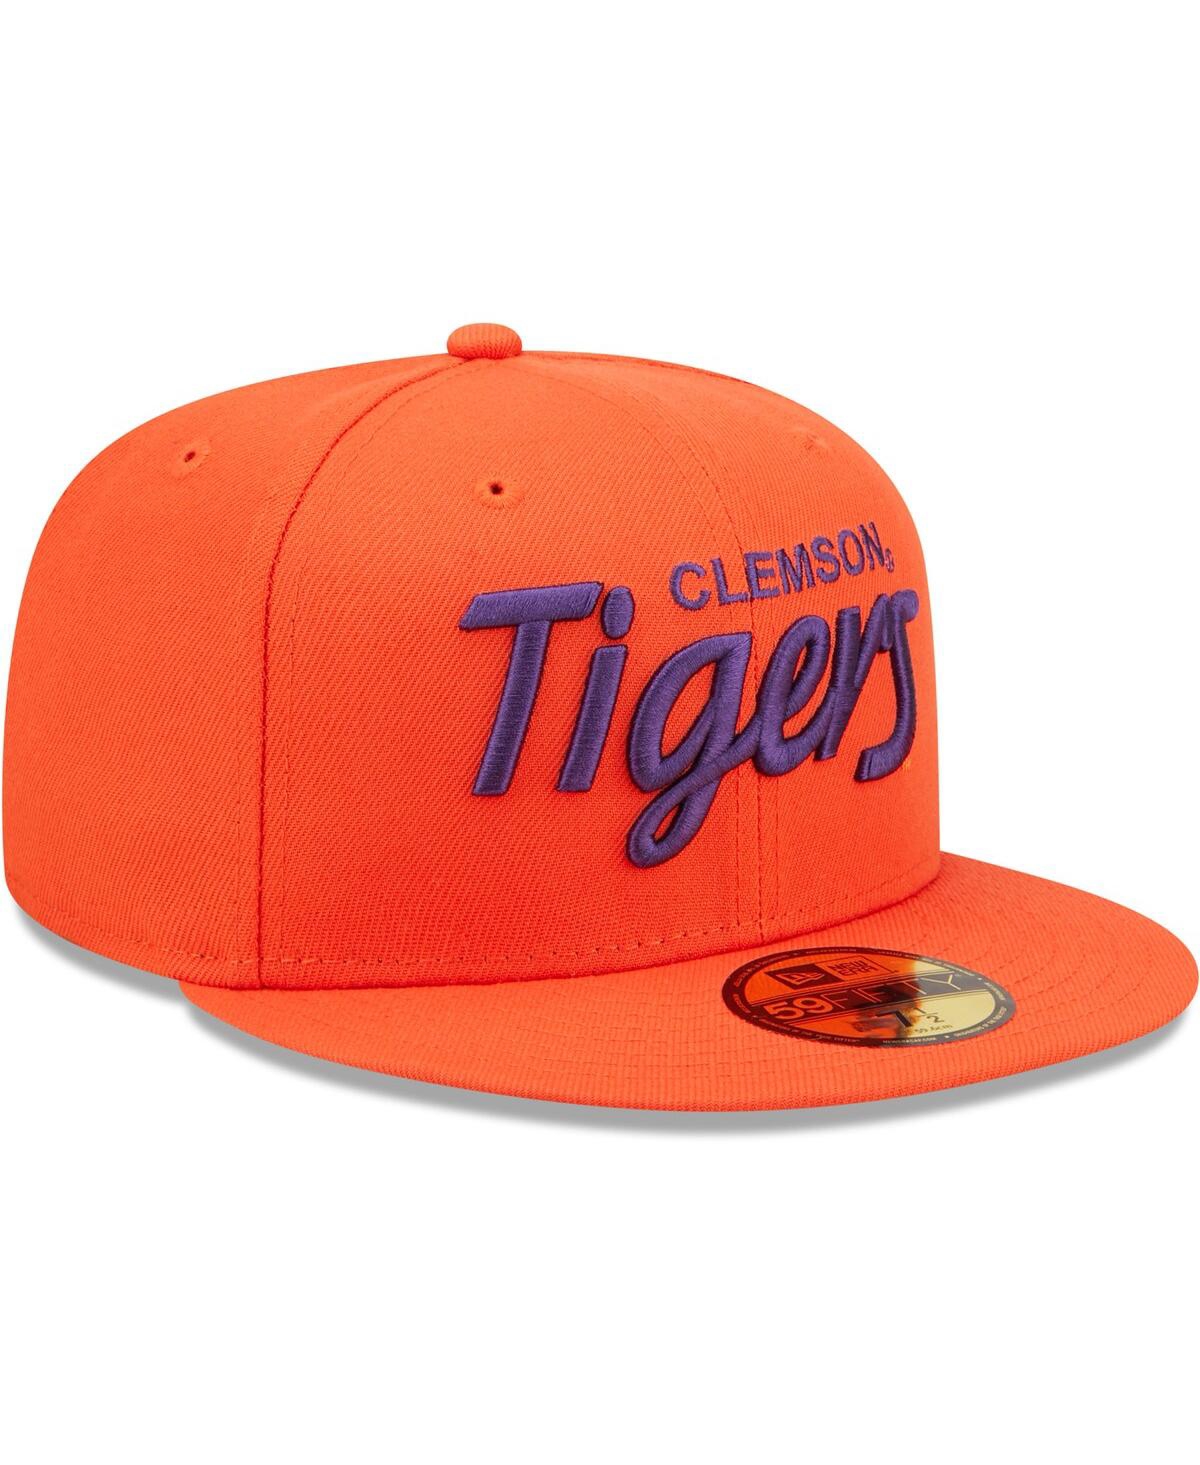 Shop New Era Men's  Orange Clemson Tigers Griswold 59fifty Fitted Hat